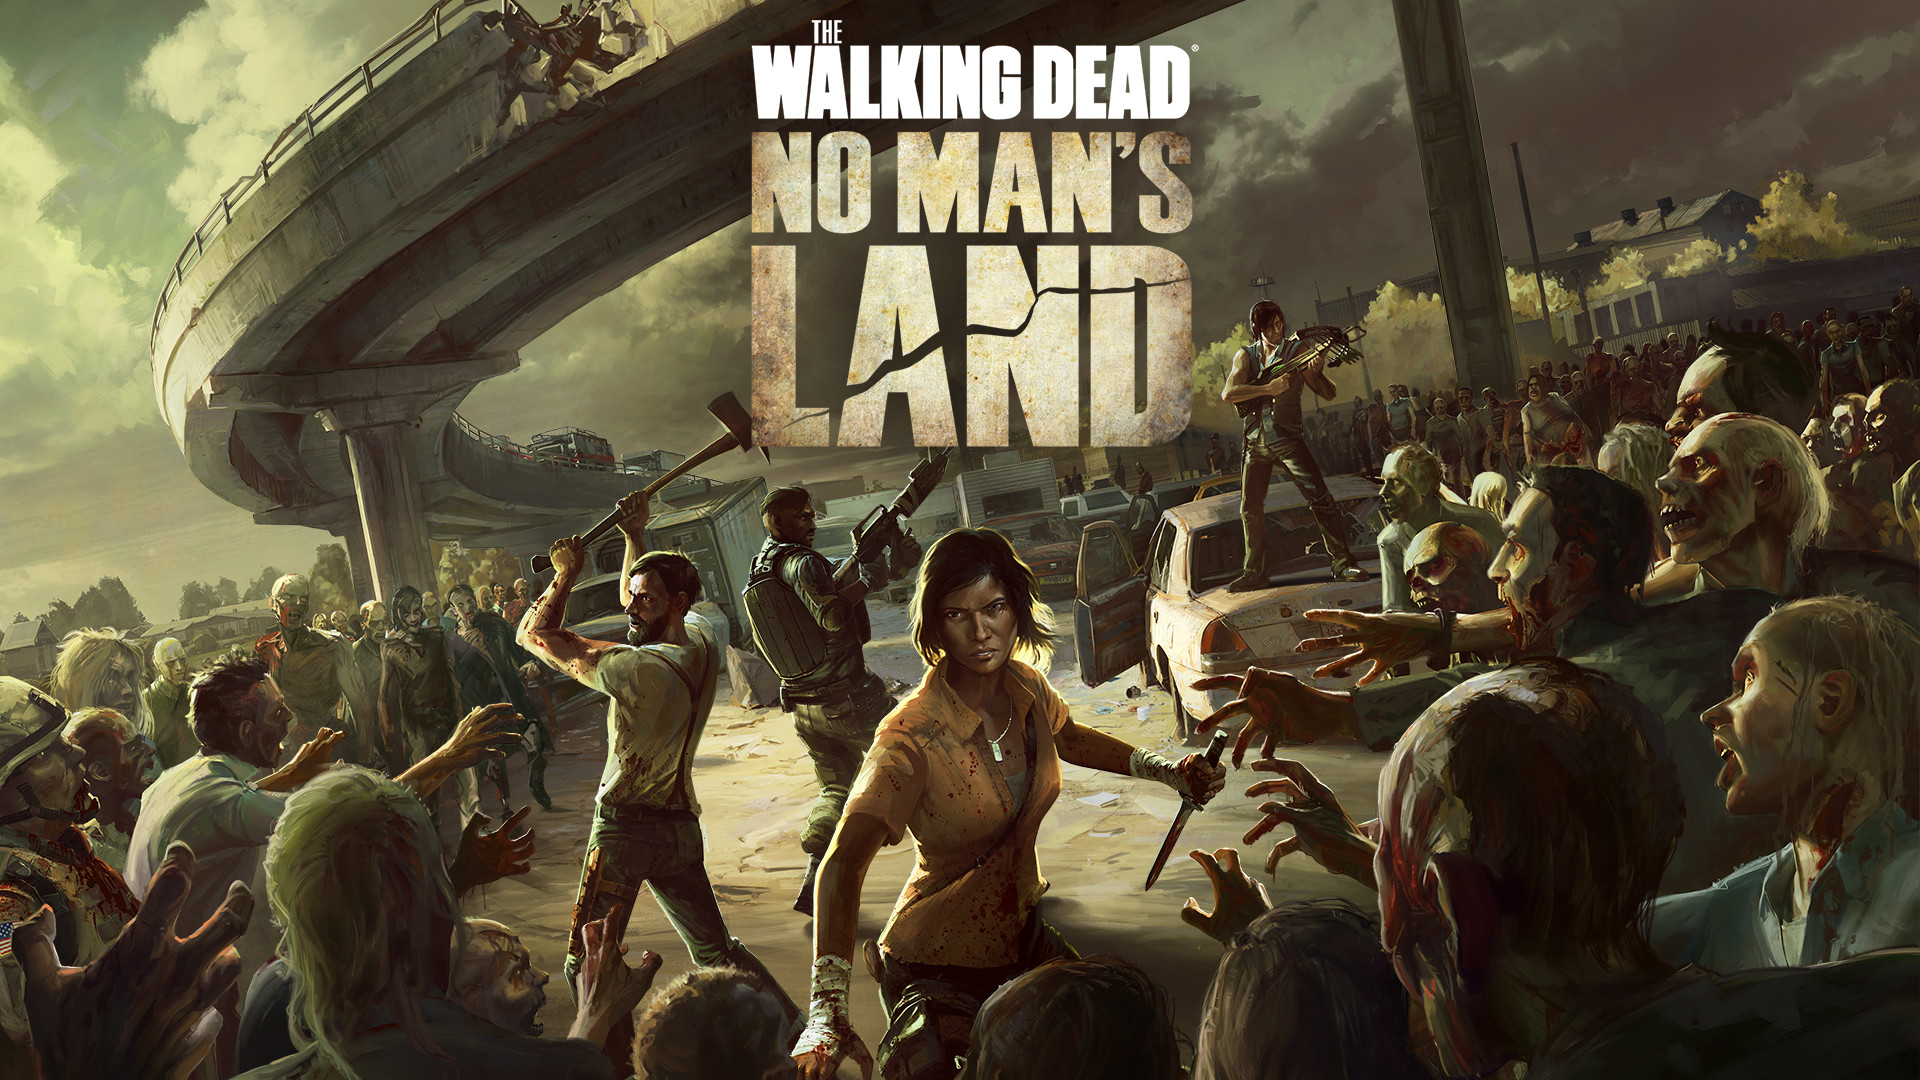 Walking dead no man s land integrated to the walking dead walking dead live wallpapers wallpapers